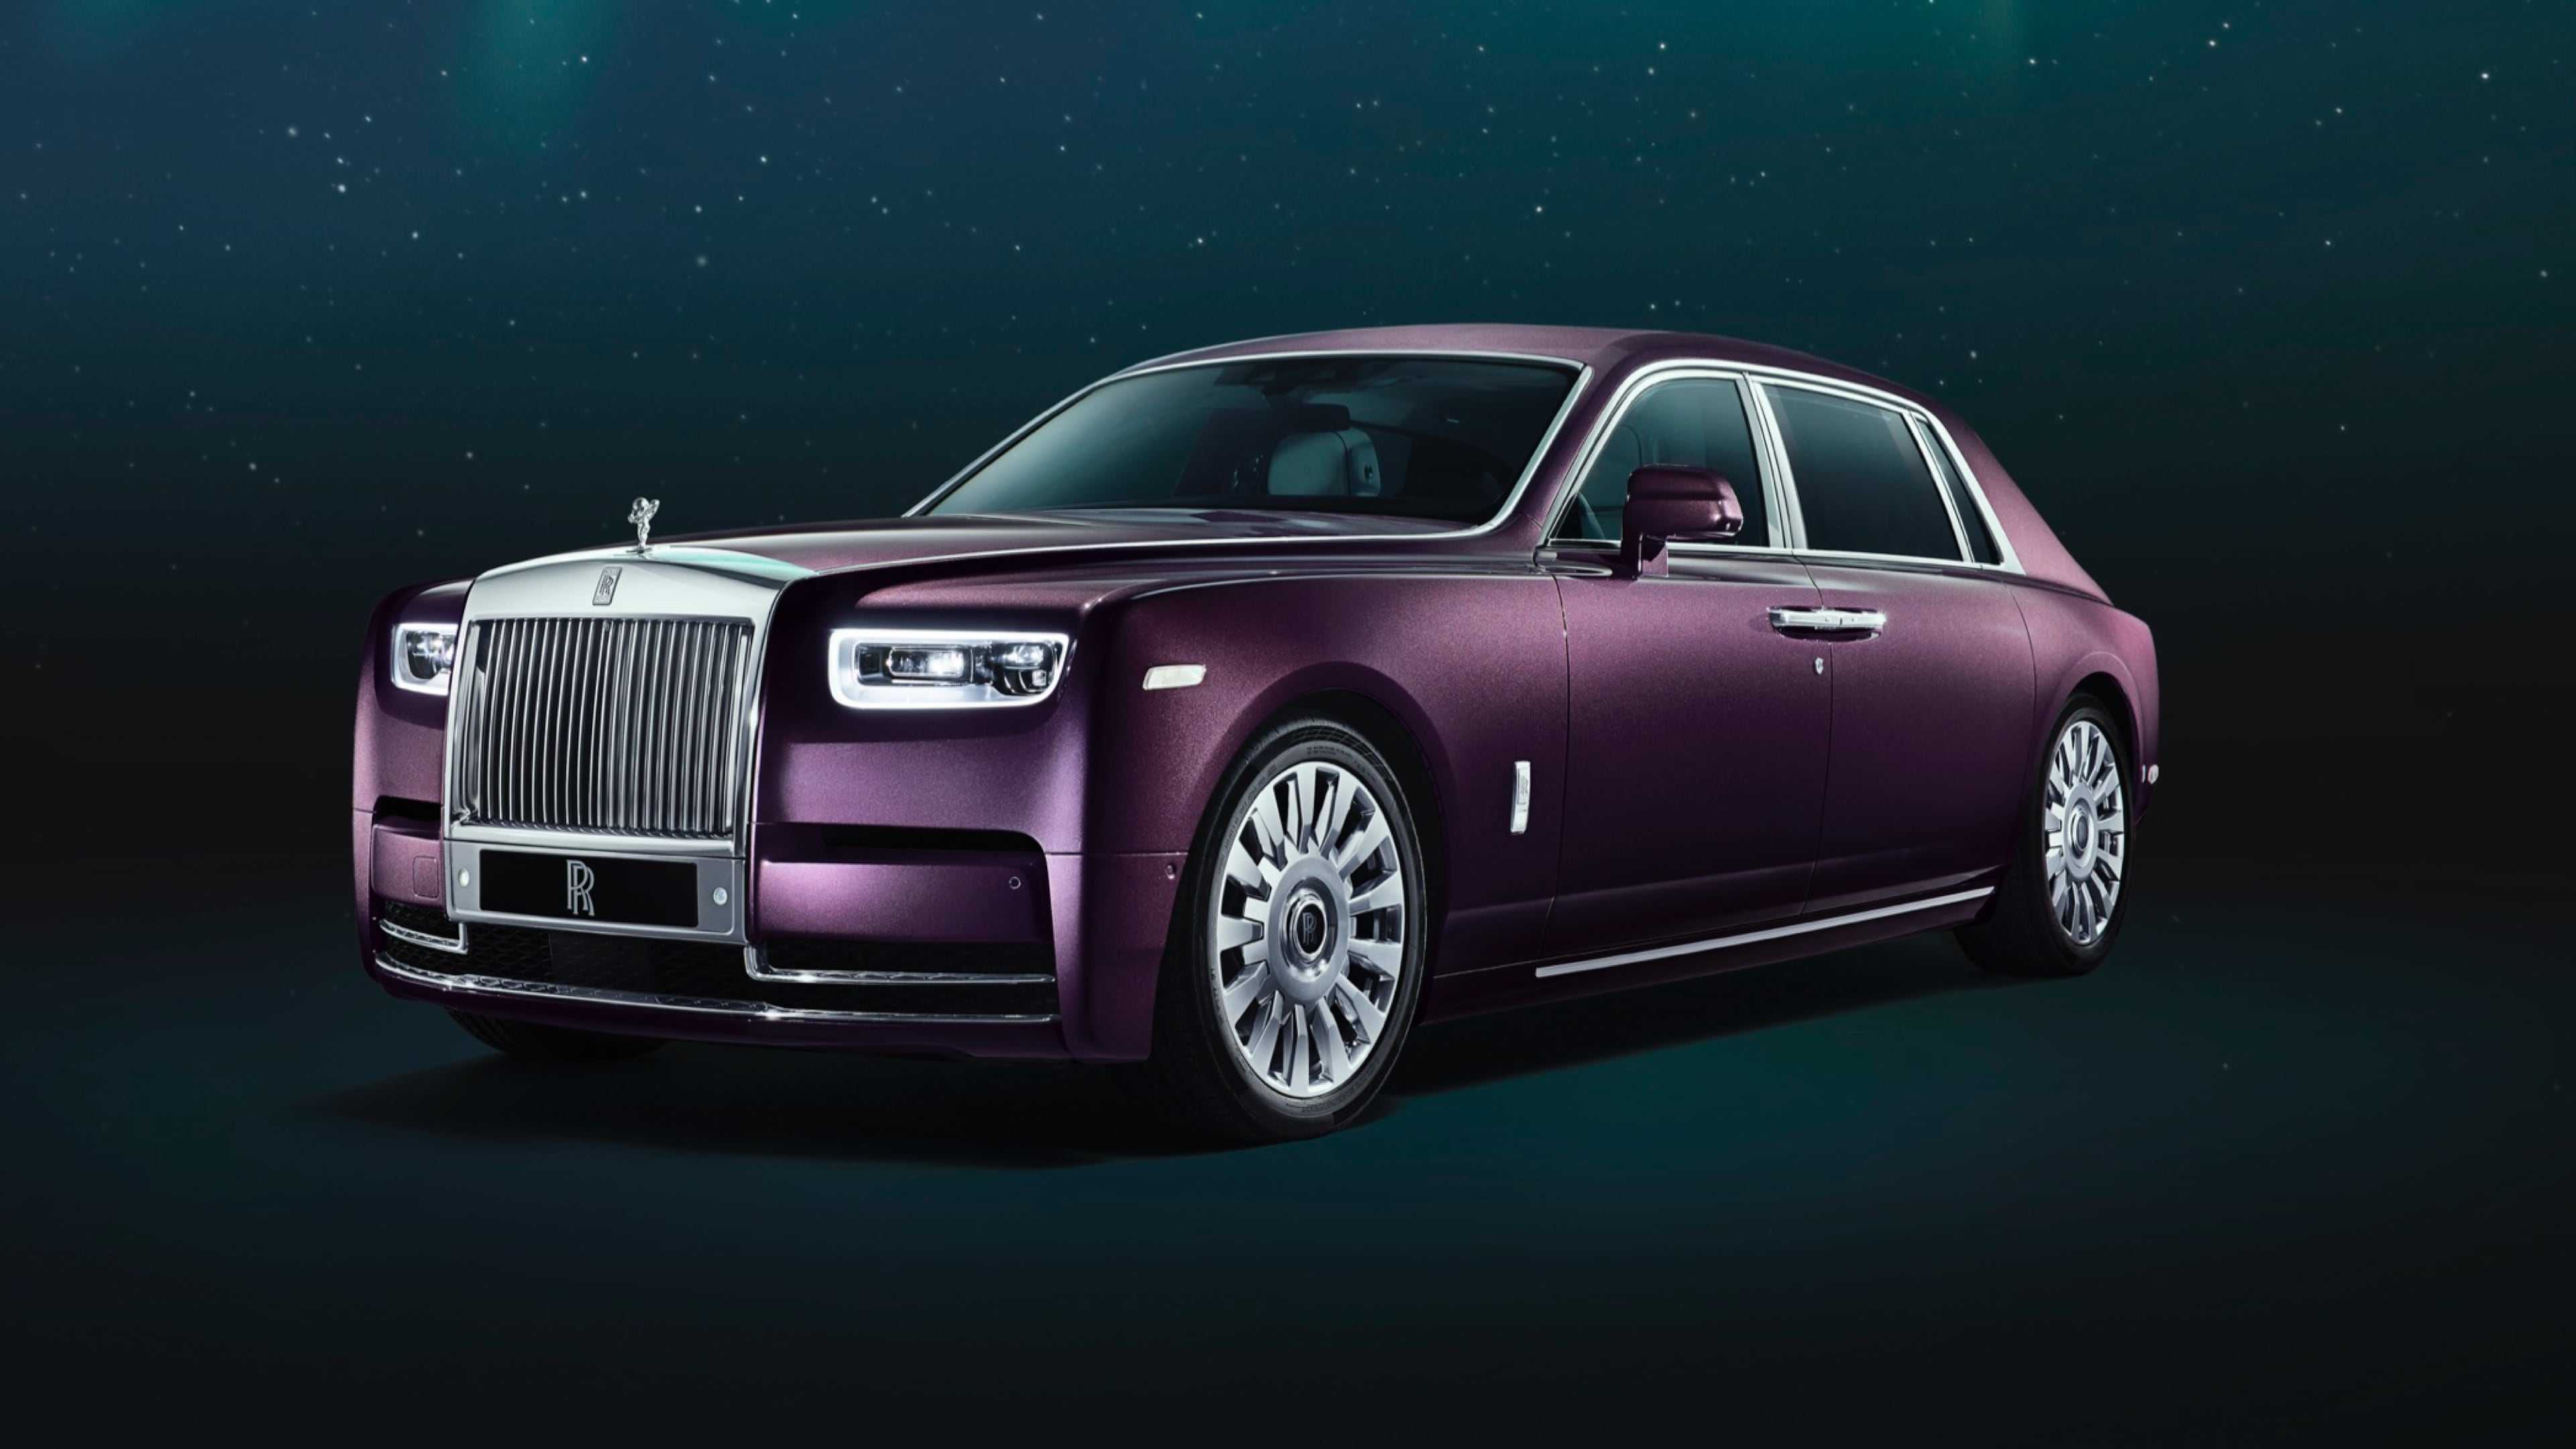 Matte Purple Rolls Royce Pictures Photos and Images for Facebook Tumblr  Pinterest and Twitter